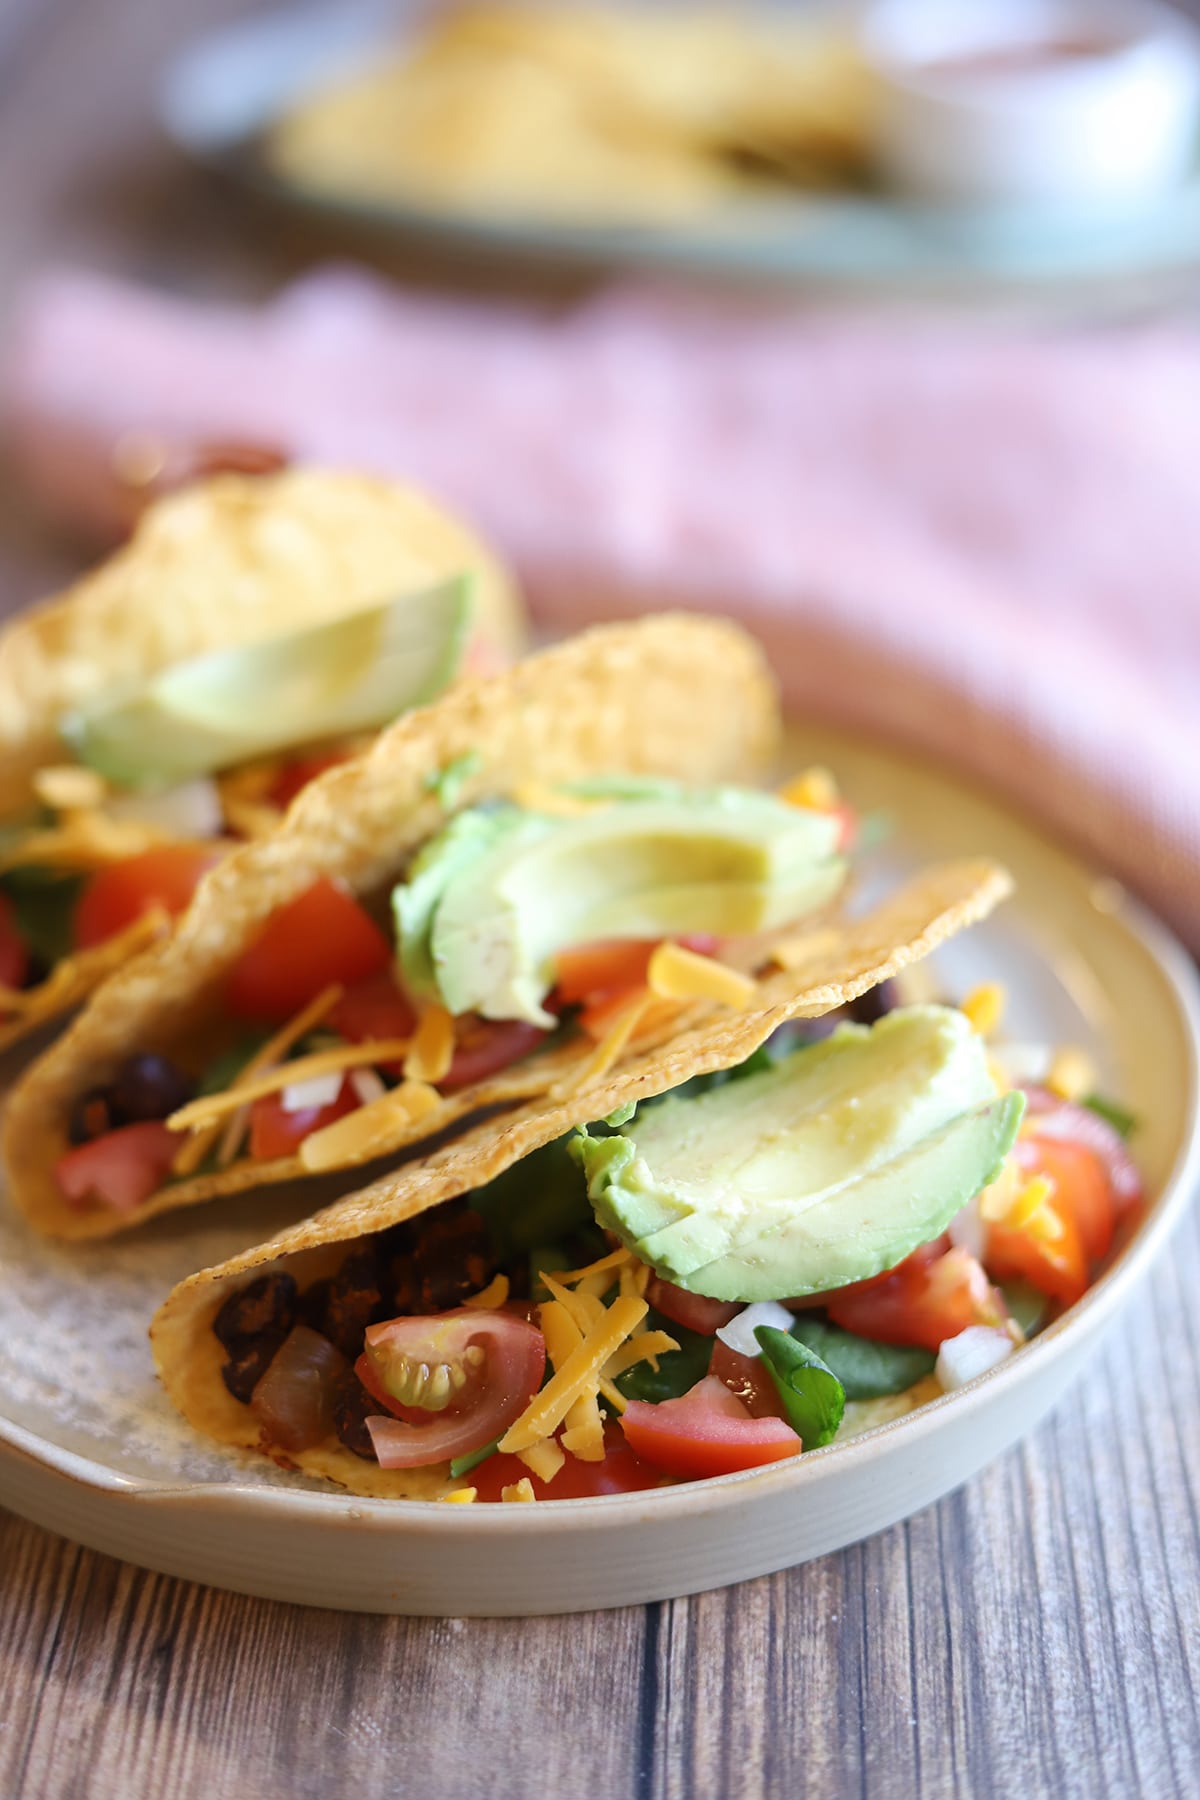 Black bean tacos stuffed with avocado, tomatoes, and non-dairy cheese.